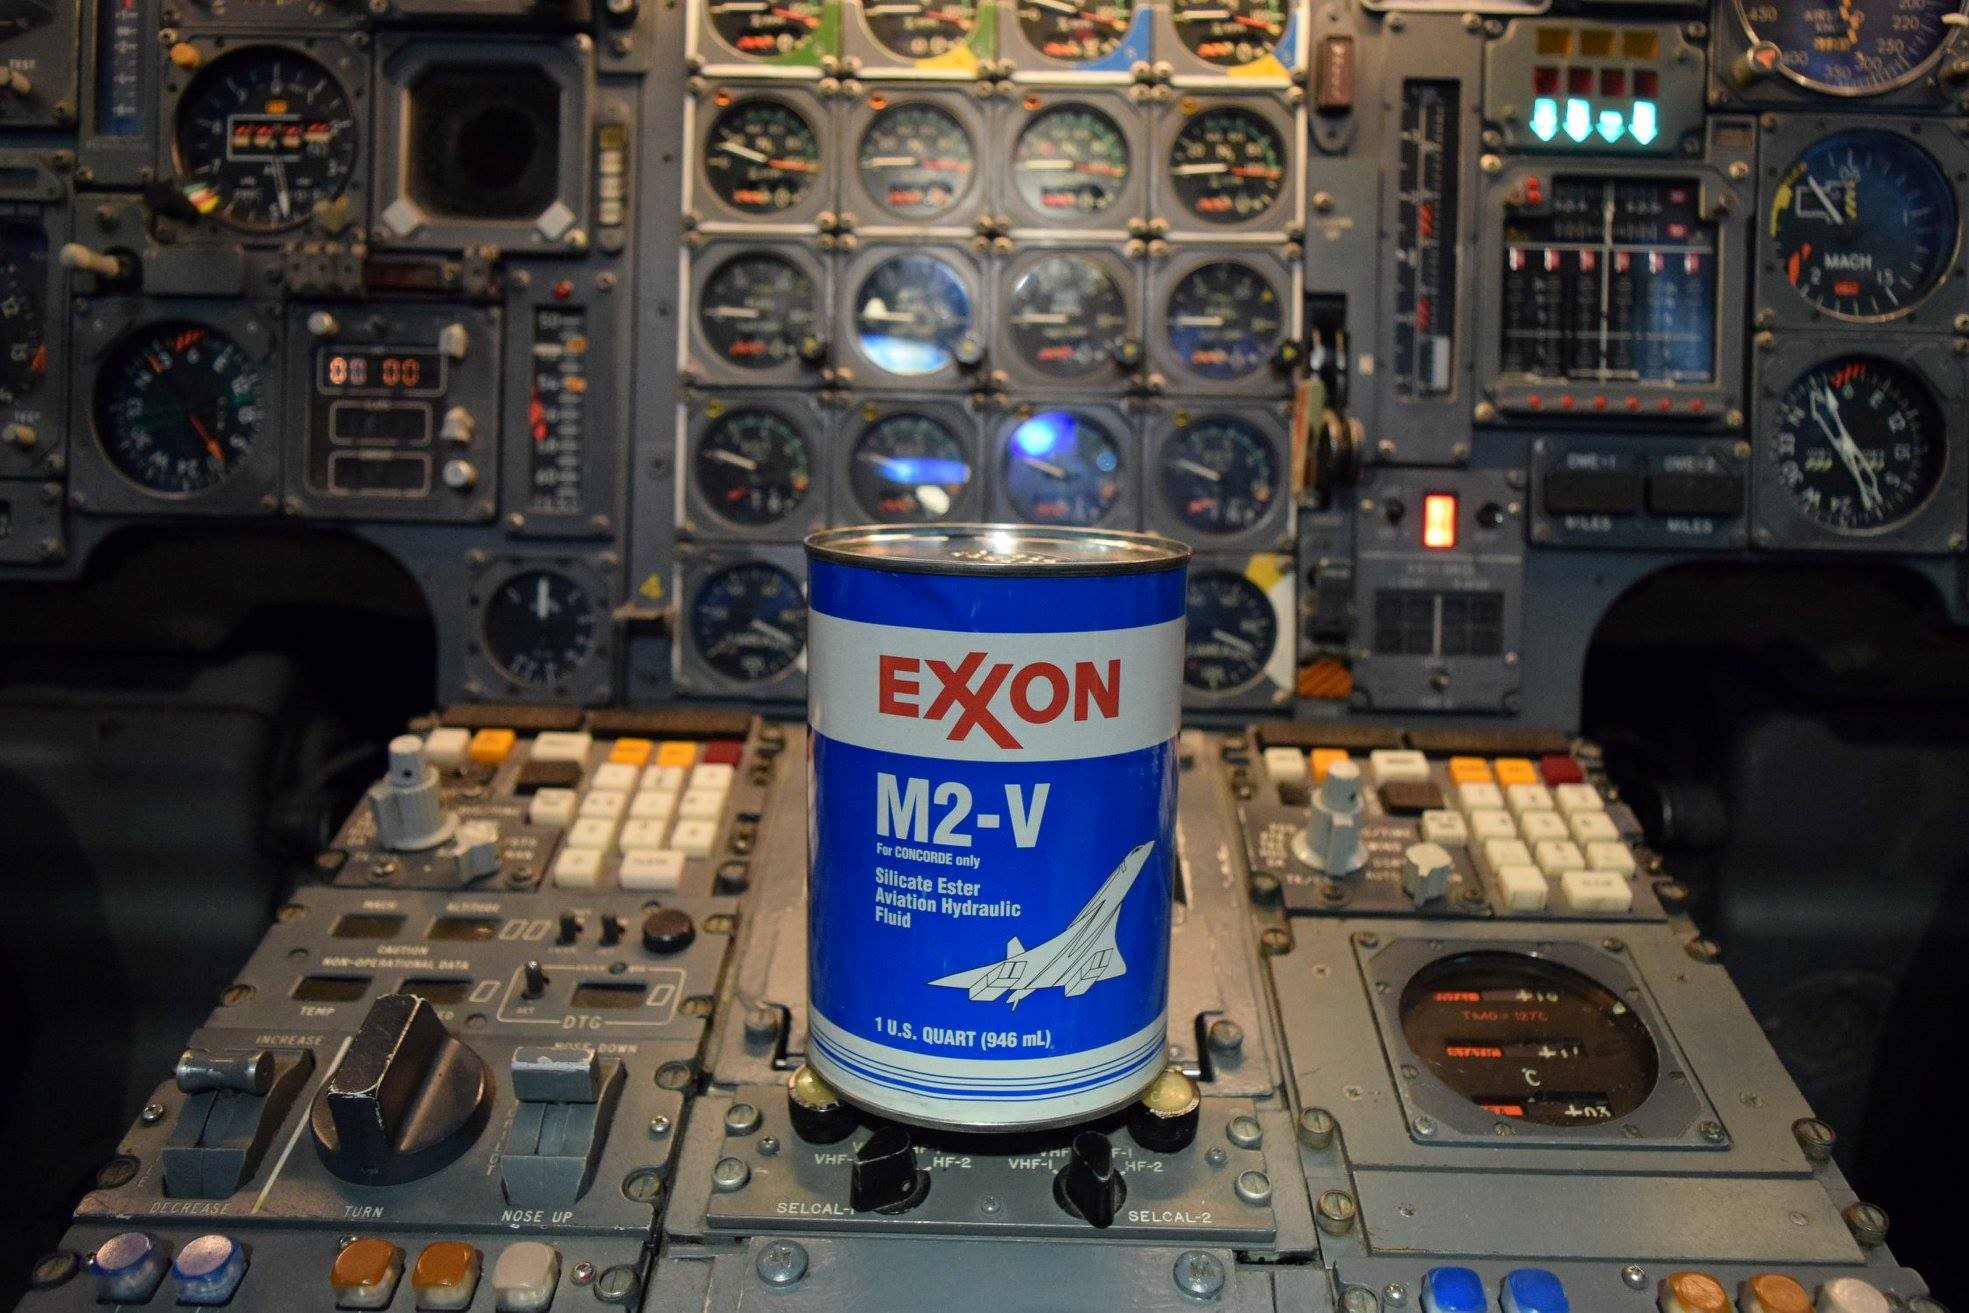 Concorde used Exxon M2-V Aviation Hydraulic Fluid to operate its droop nose.